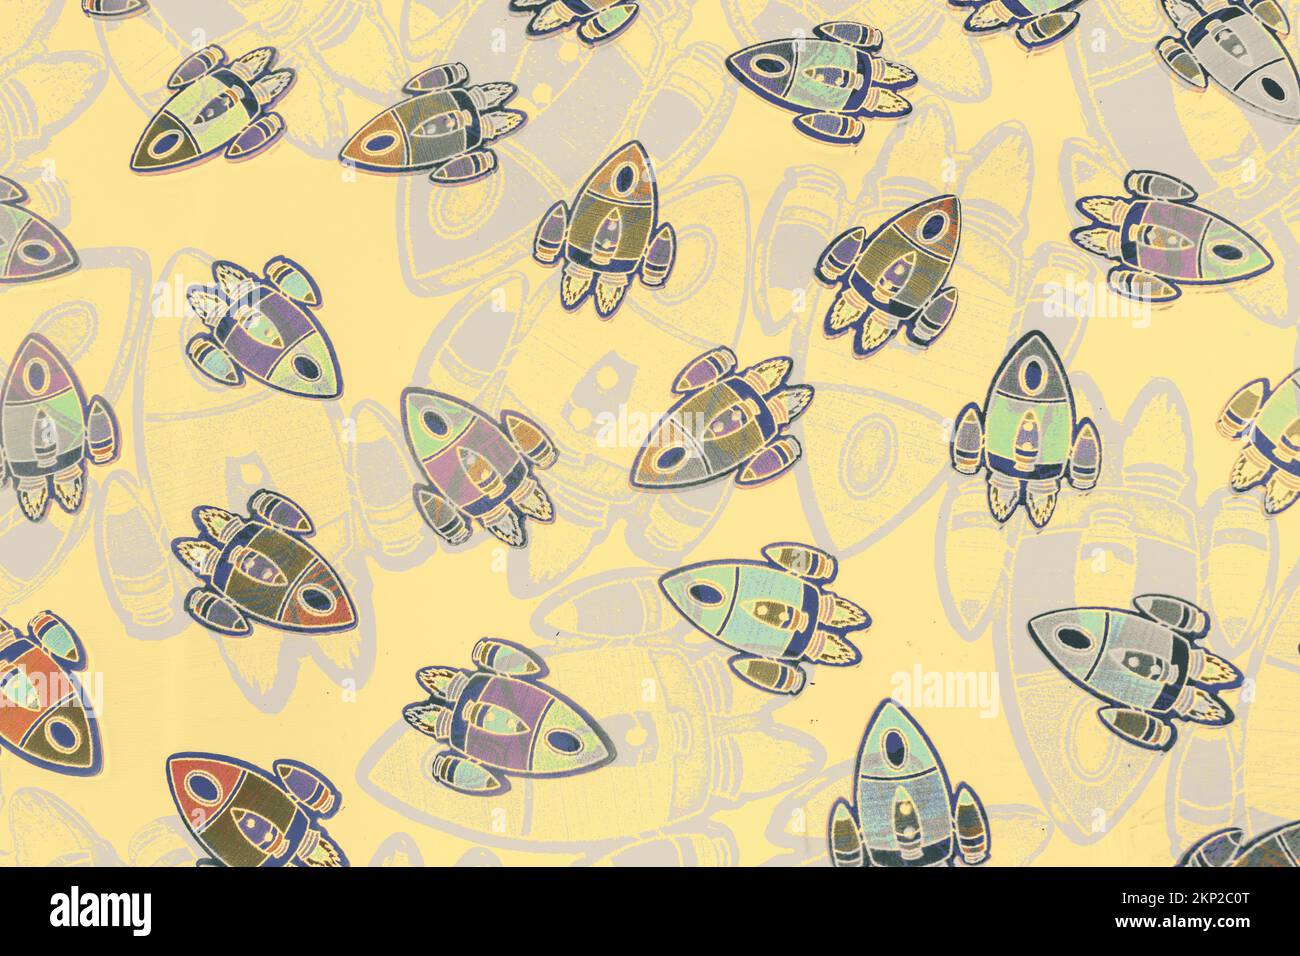 A retro space shuttle transit in abstract childhood design. Overlaid orbits Stock Photo